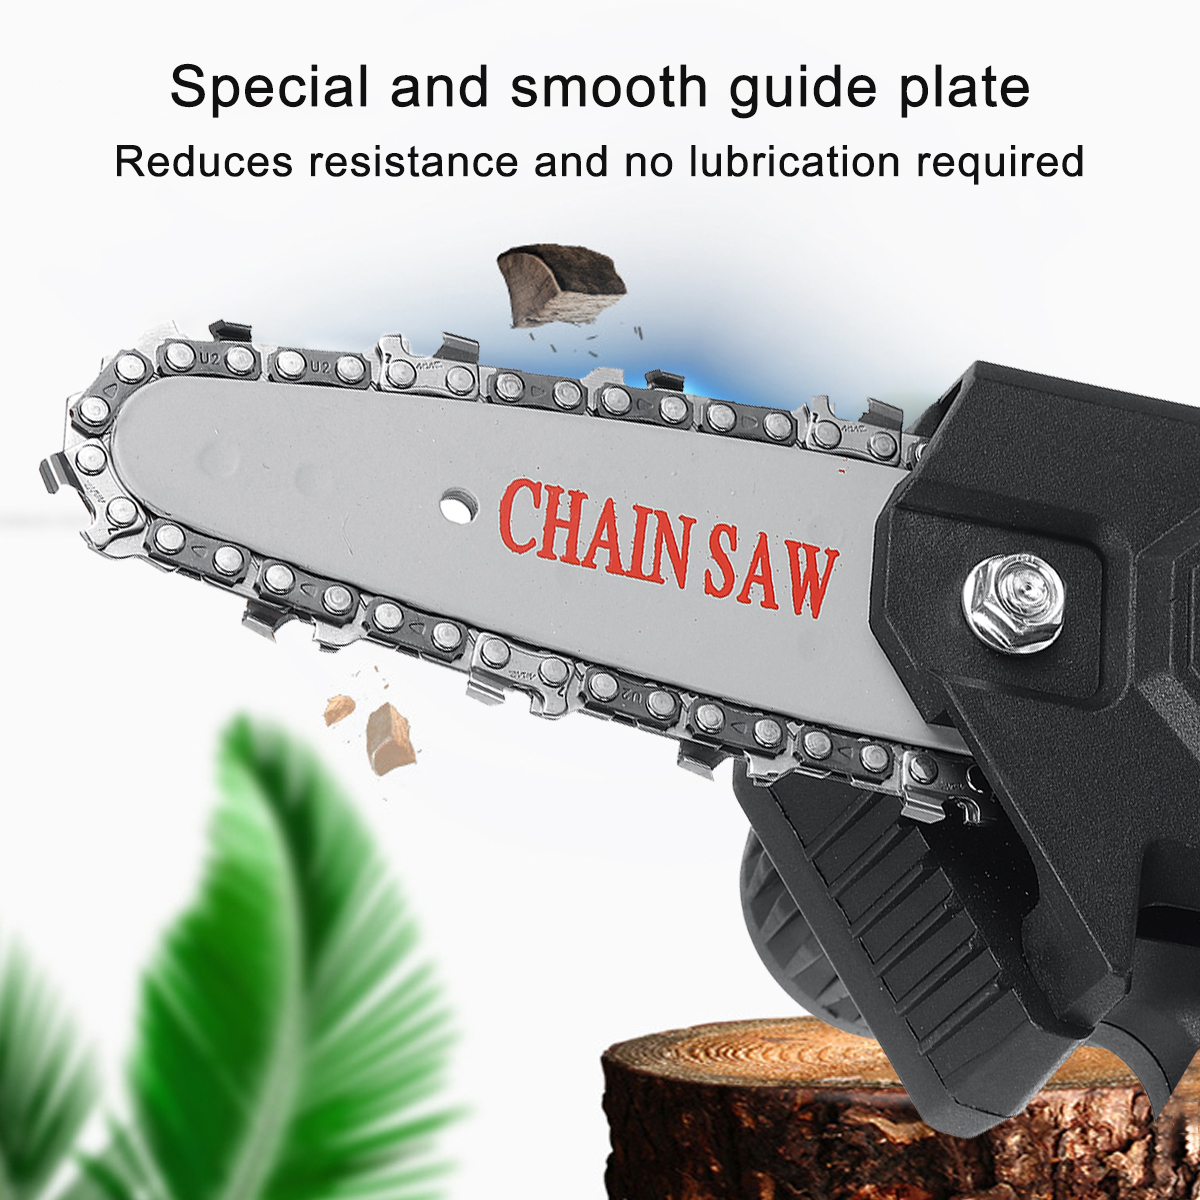 21V-4-Inch-600W-Electric-Chain-Saw-Handheld-Cordless-Rechargeable-Portable-Woodworking-Saw-W-012pcs--1807522-4